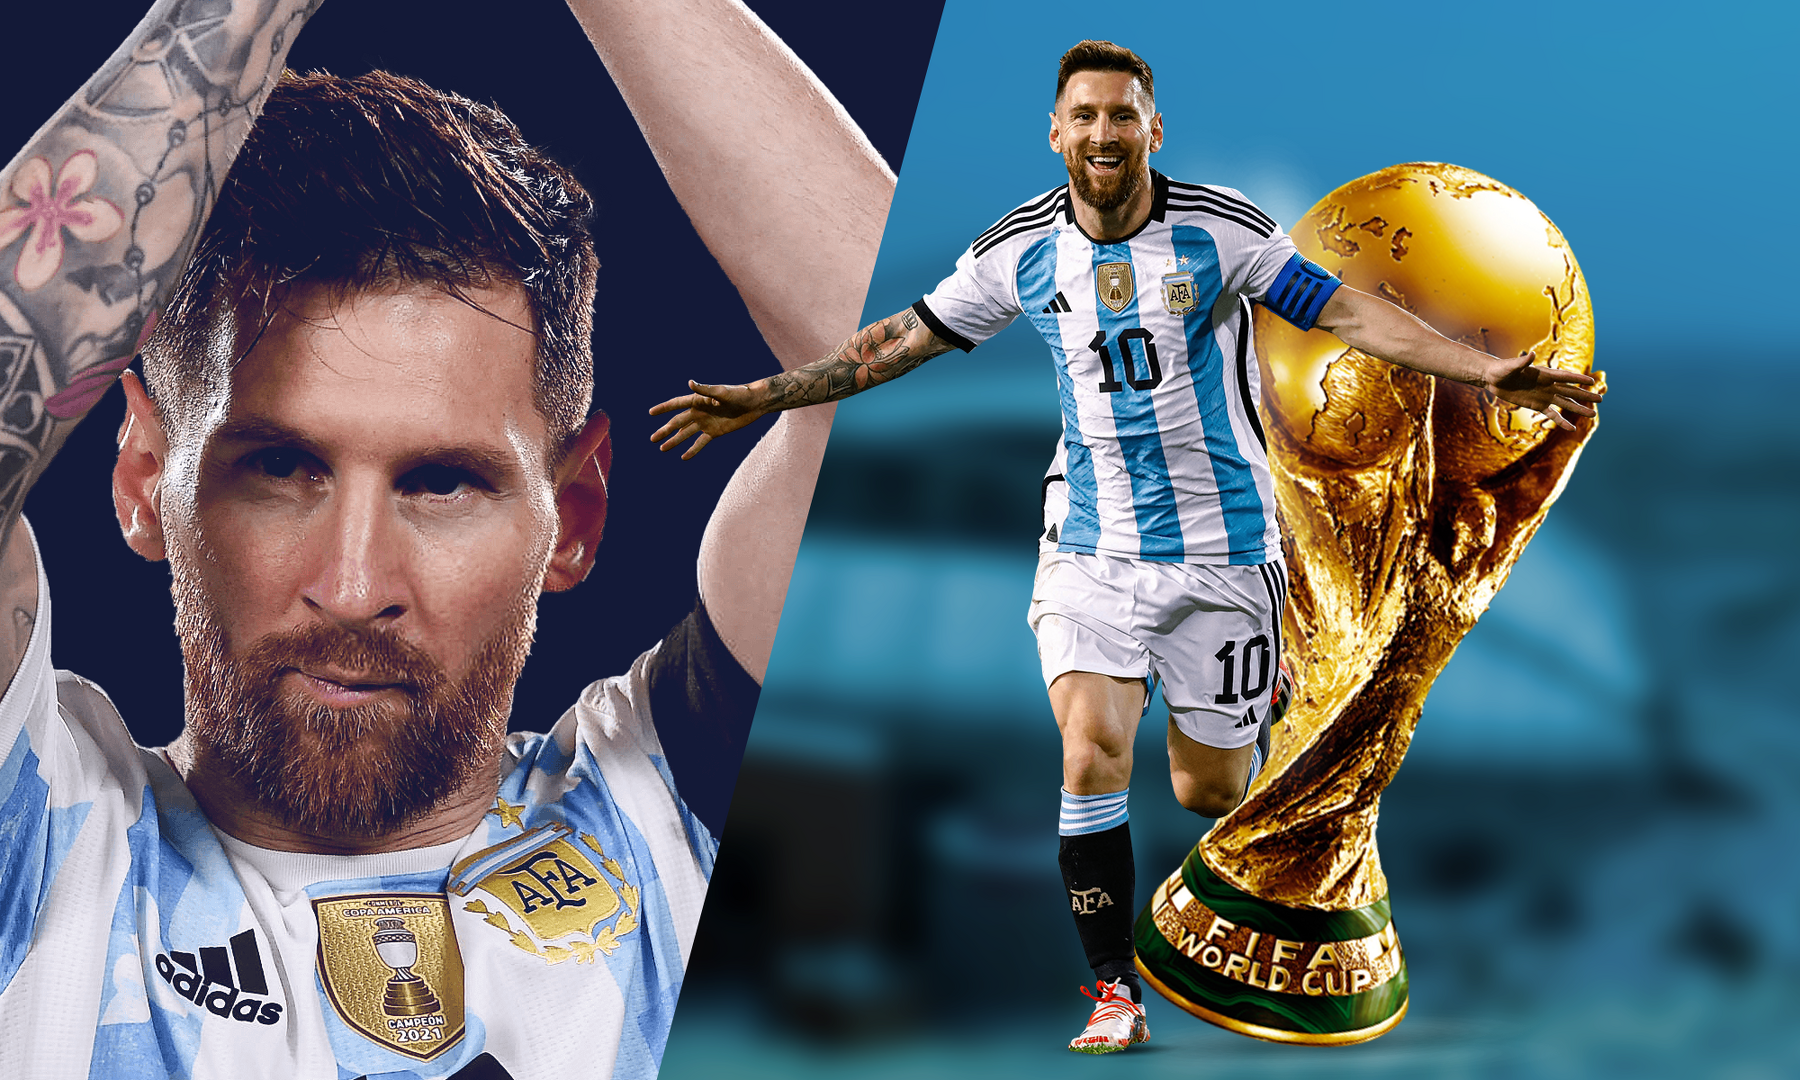 Top FIFA World Cup records set by Lionel Messi